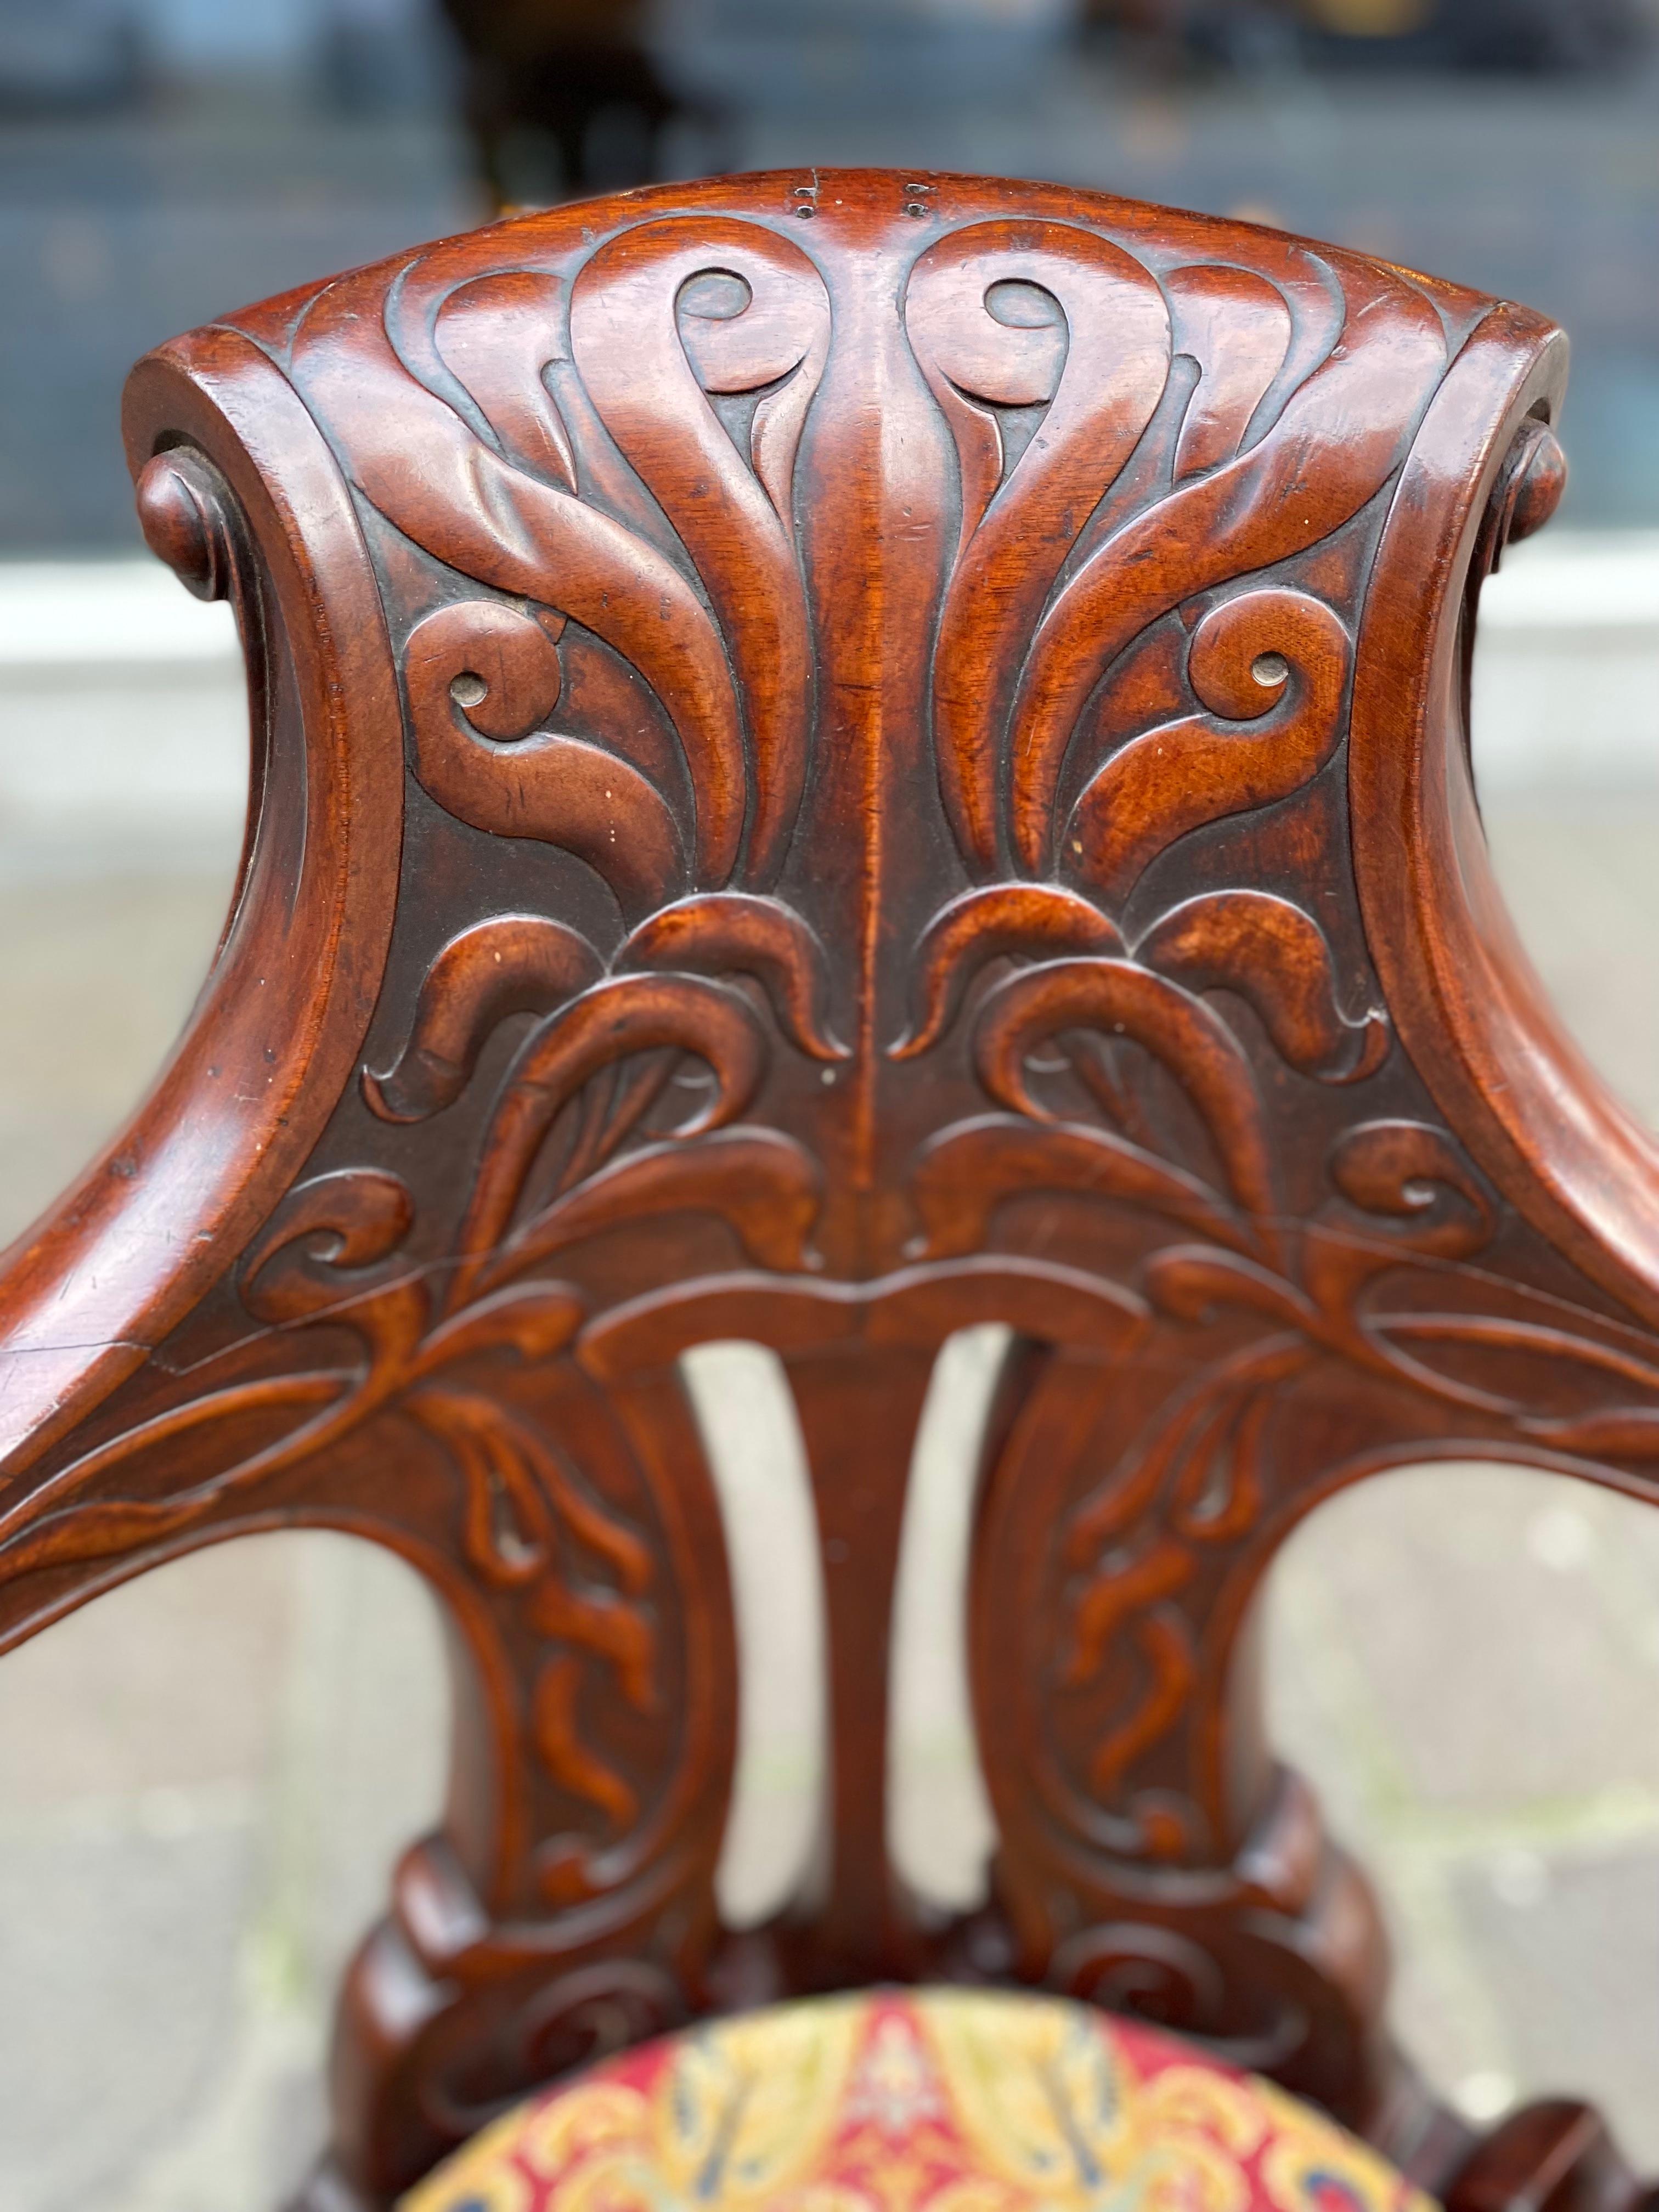 Edwardian A Carved Mahogany Ship's Armchair From The White Star Line RMS Olympic